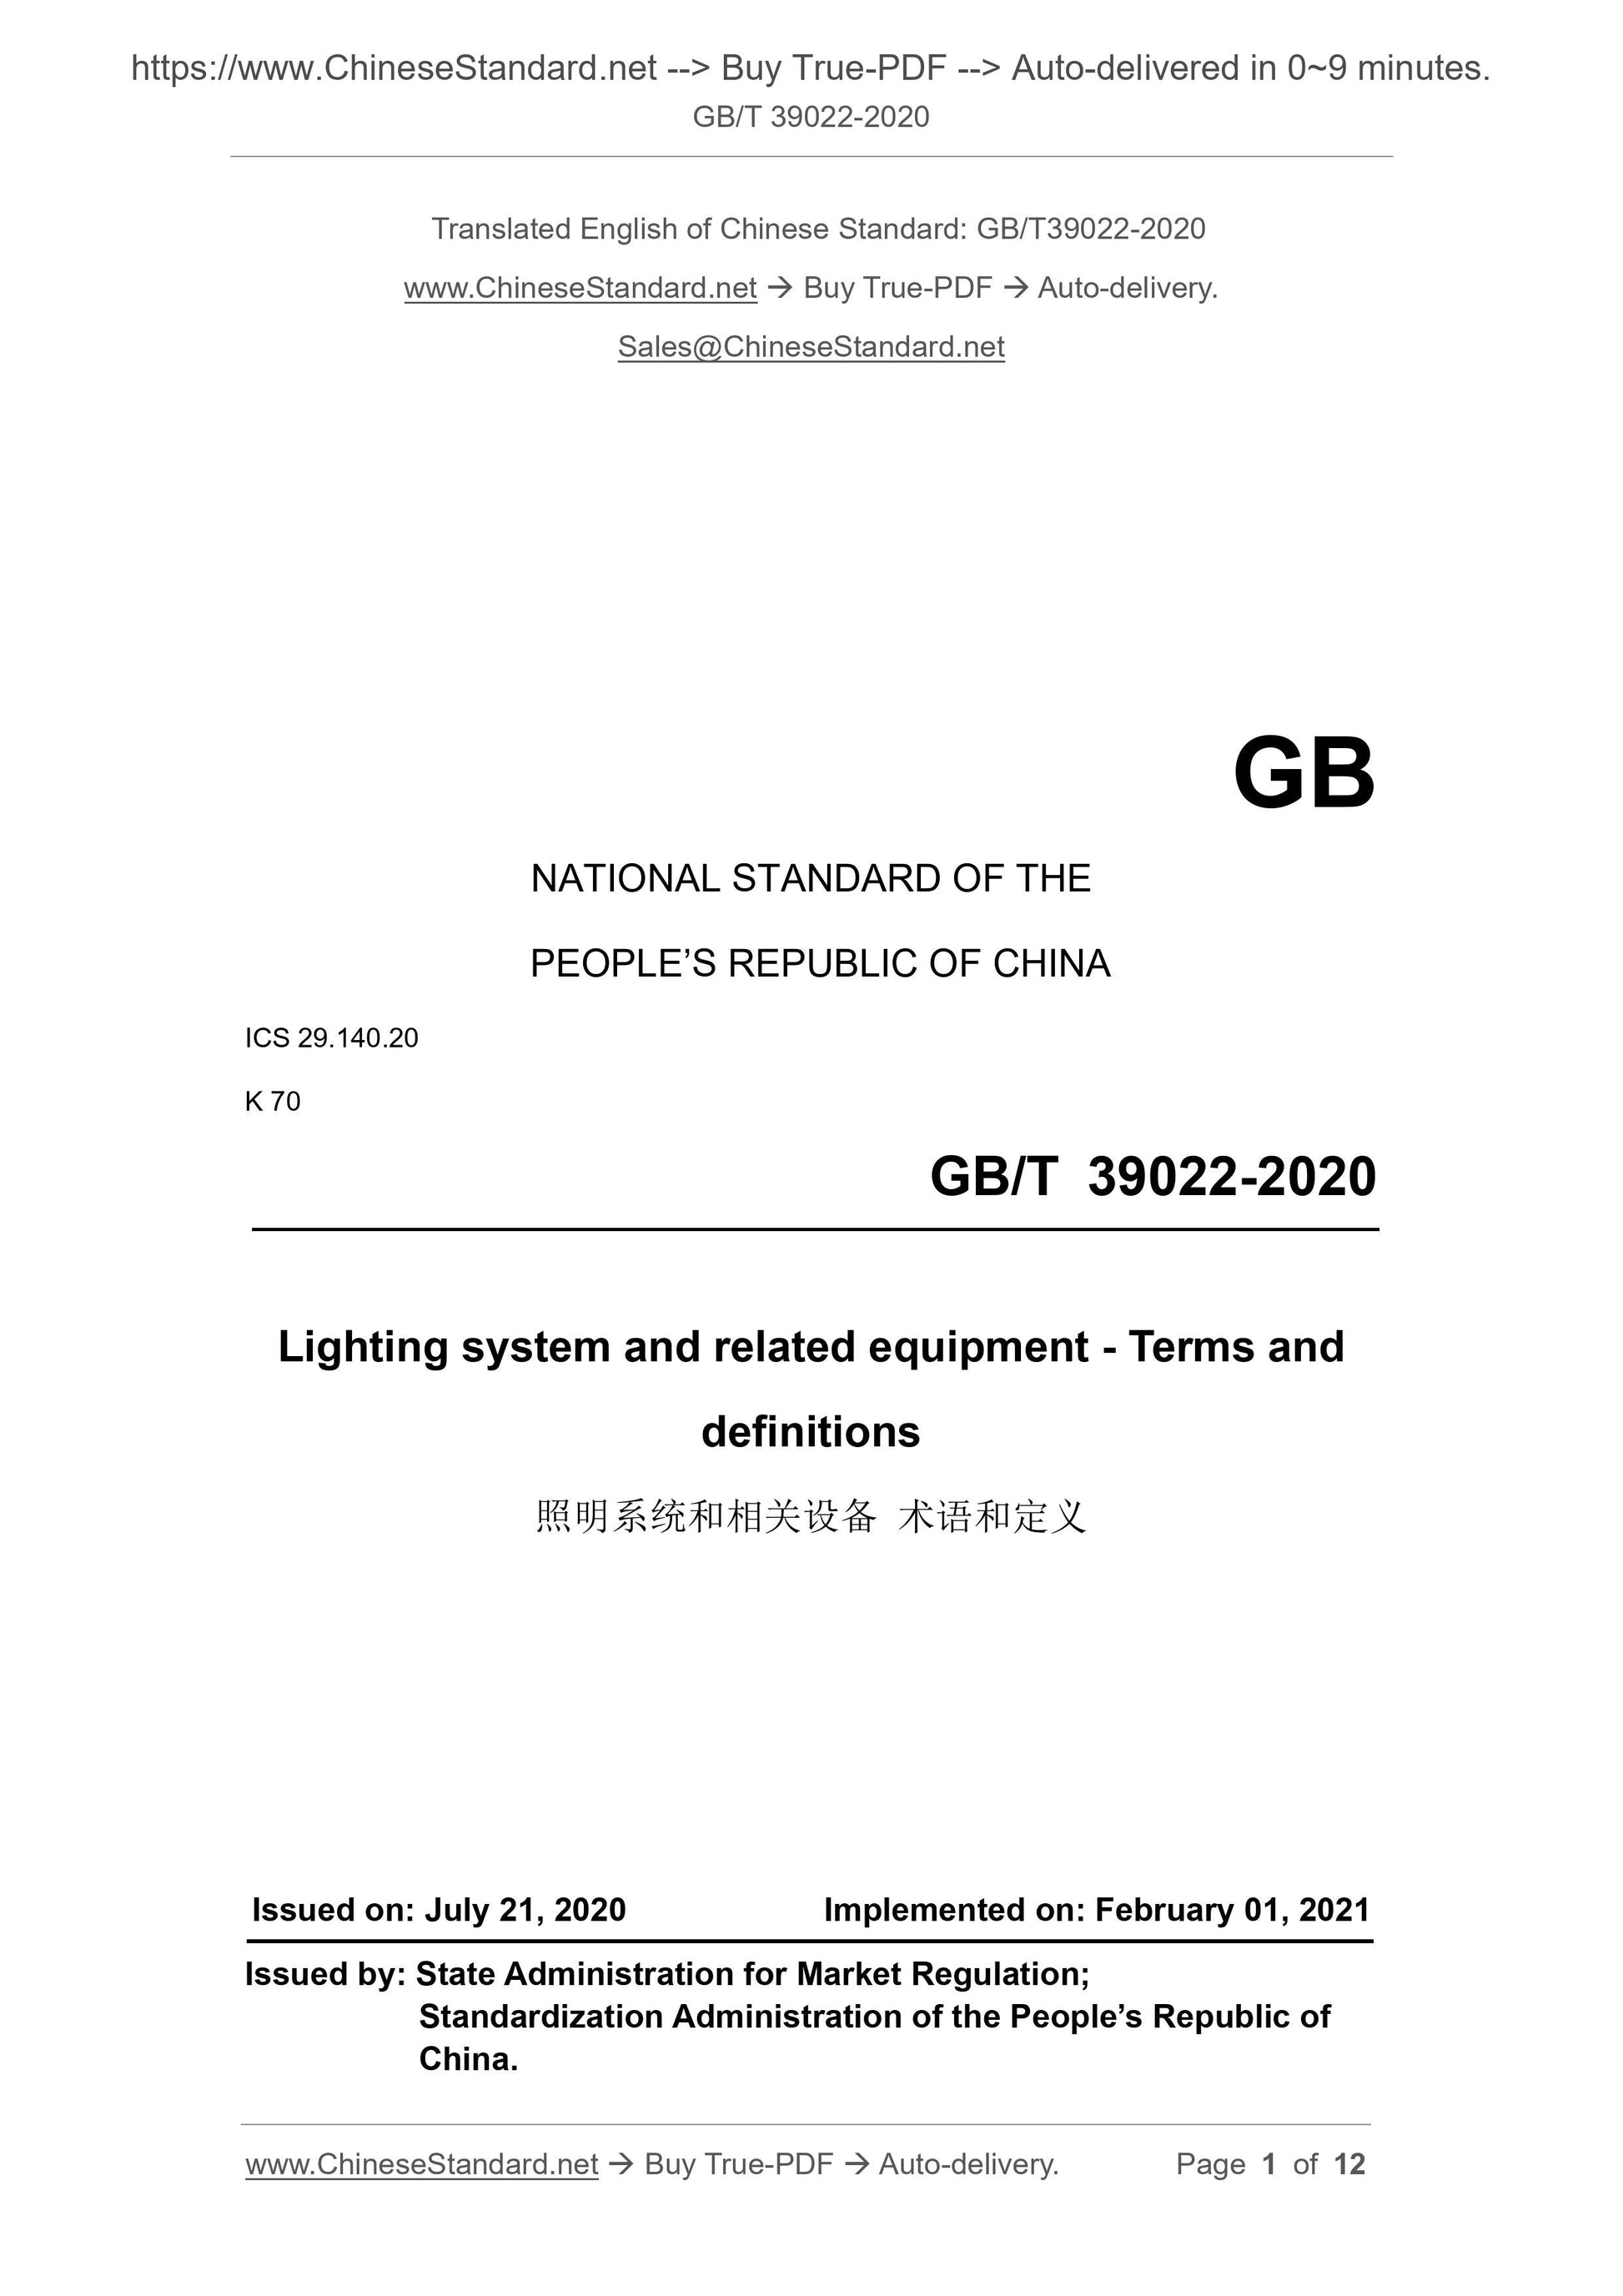 GB/T 39022-2020 Page 1